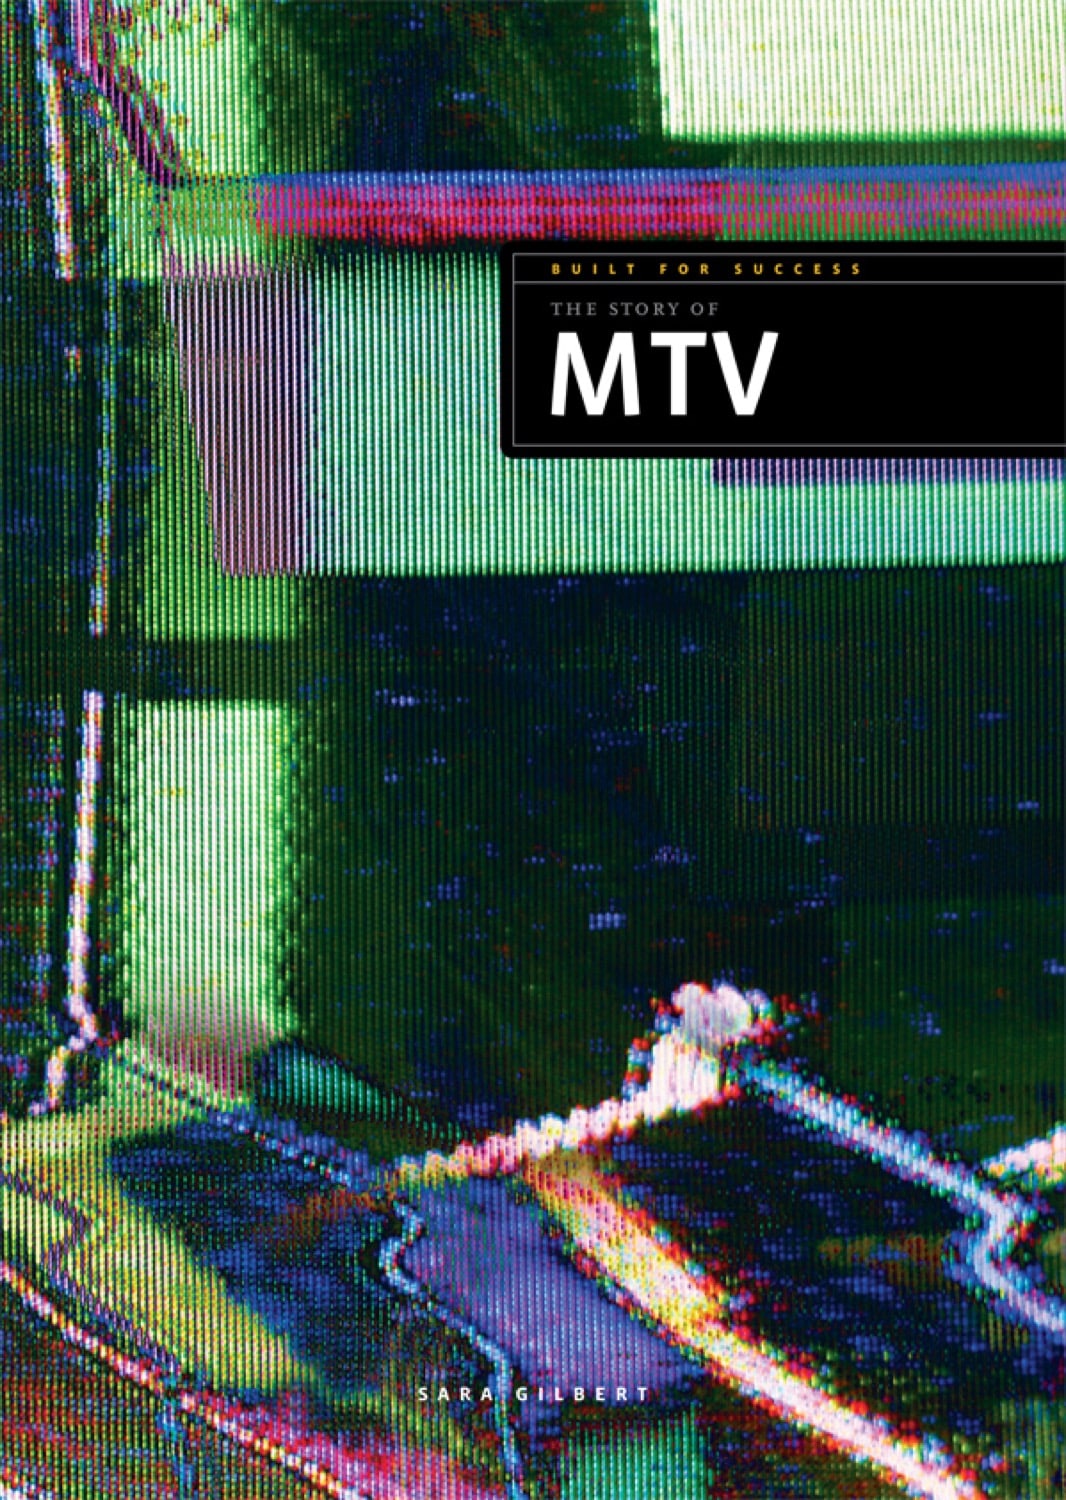 Built for Success: The Story of MTV